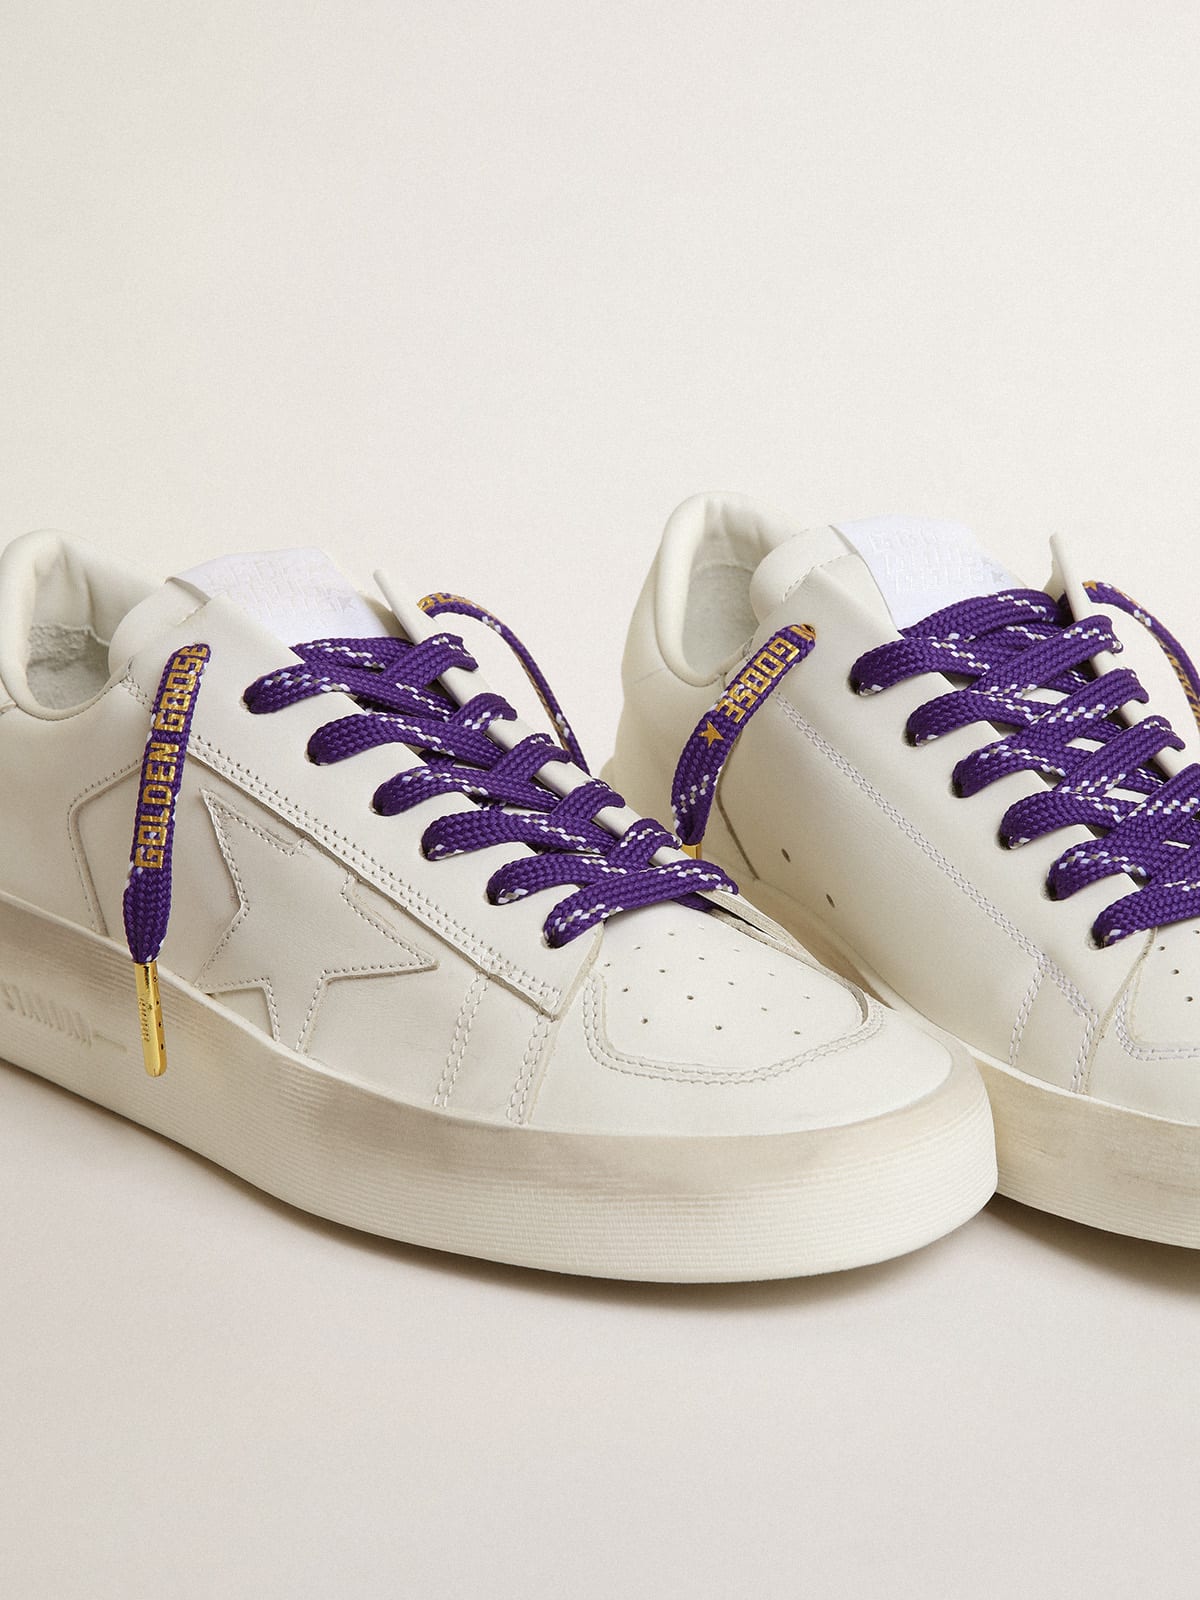 Golden Goose - Purple laces with decorations and contrasting gold-colored logo in 